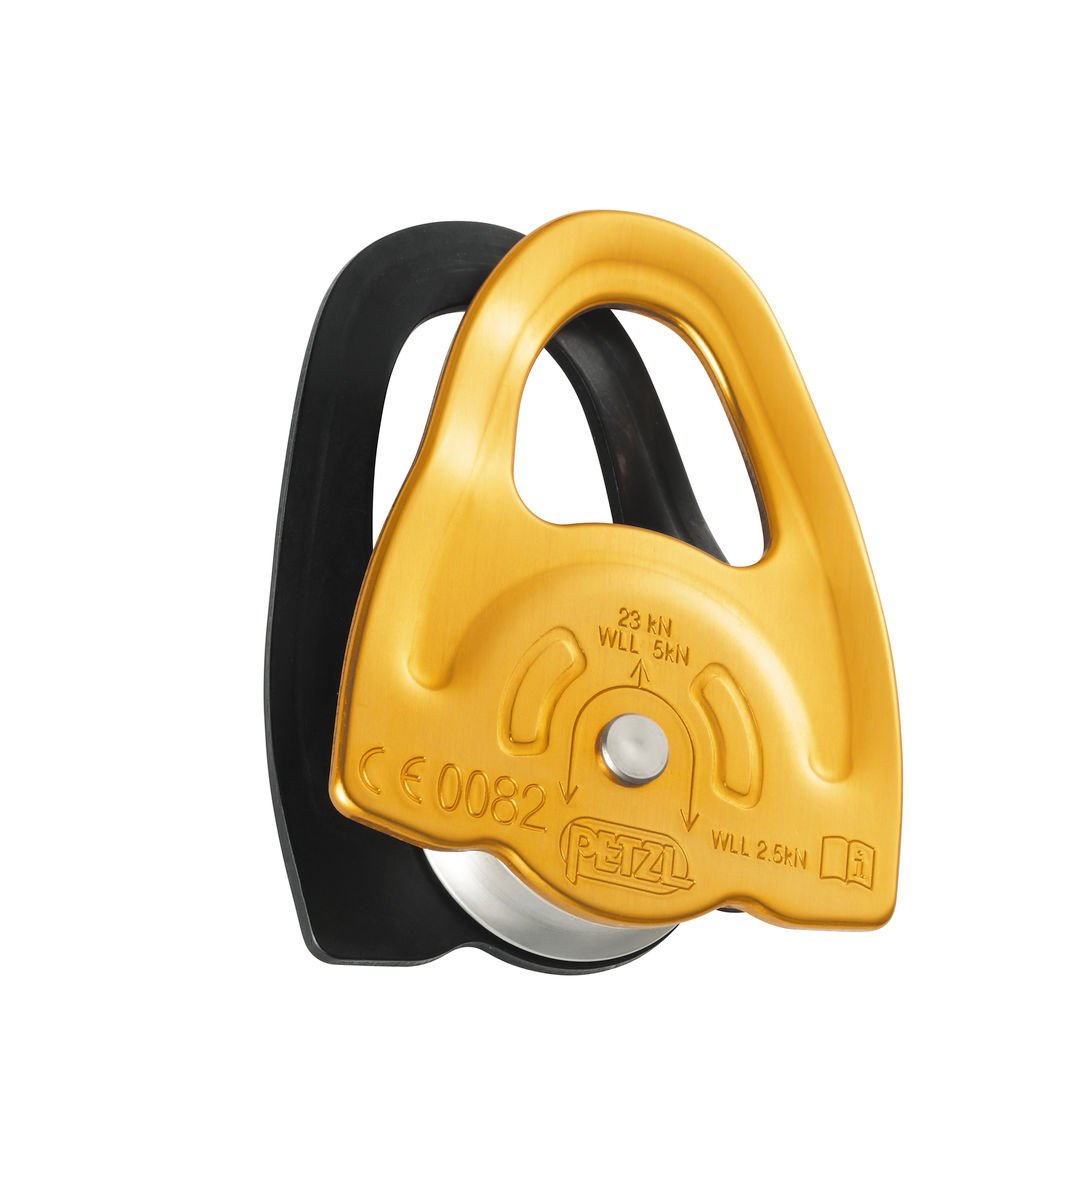 This high efficiency, lightweight Prusik pulley by Petzl is very compact offering a lightweight solution for setting up progress capture systems. Available now.